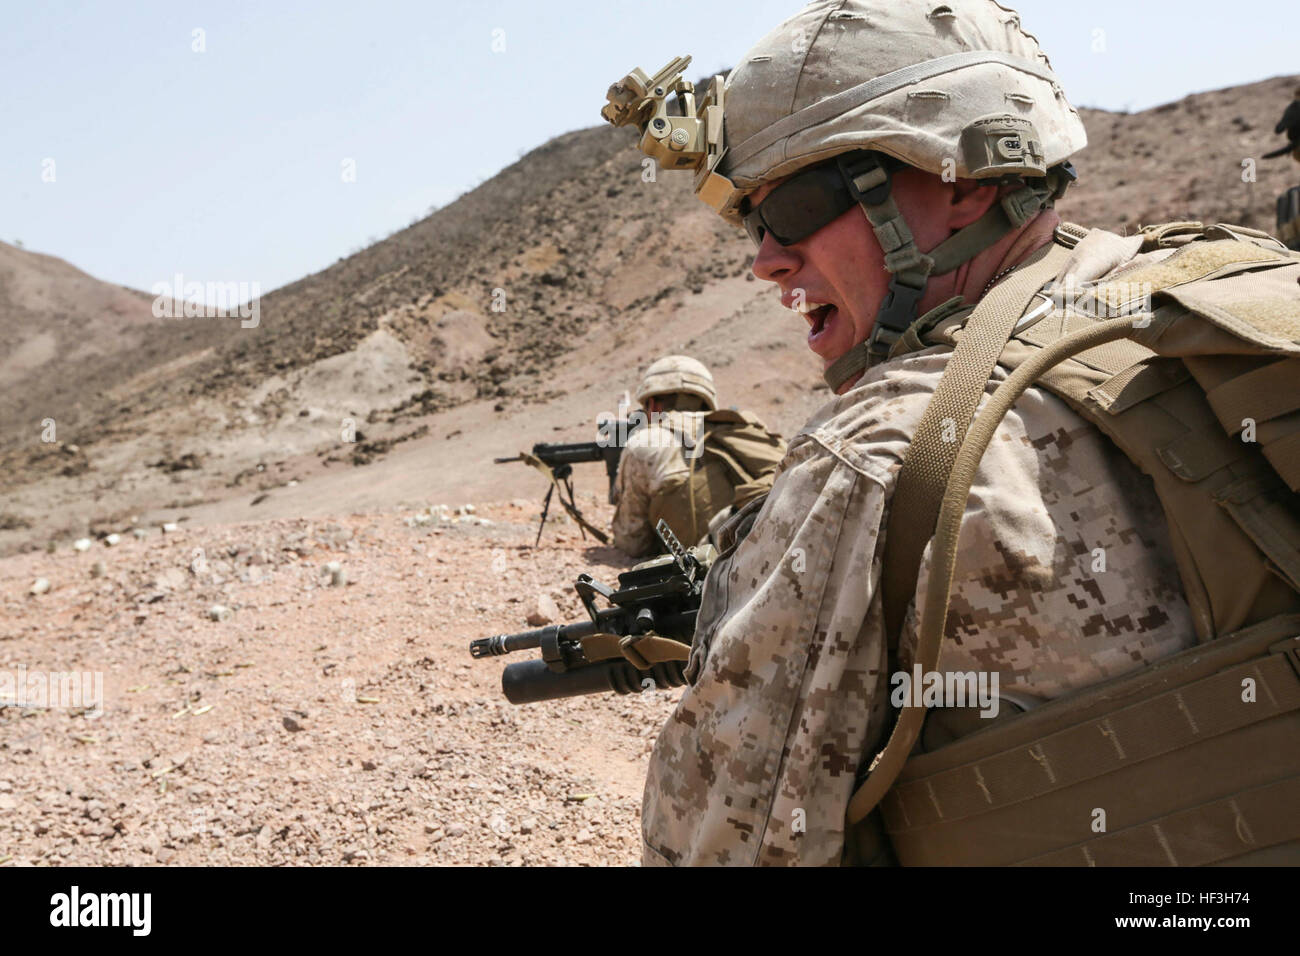 ARTA BEACH, Djibouti (July 22, 2015) A U.S. Marine team leader with Battalion Landing Team 3rd Battalion, 1st Marine Regiment, 15th Marine Expeditionary Unit, yells commands to his squad during a squad-attack exercise.  The Marines of BLT 3/1 executed a series of attack and maneuver drills consisting of, machine gun, squad and night attacks.  Elements of the 15th Marine Expeditionary Unit are ashore in Djibouti for sustainment training to maintain and enhance the skills they developed during their pre-deployment training period.  The 15th MEU is currently deployed in support of maritime securi Stock Photo